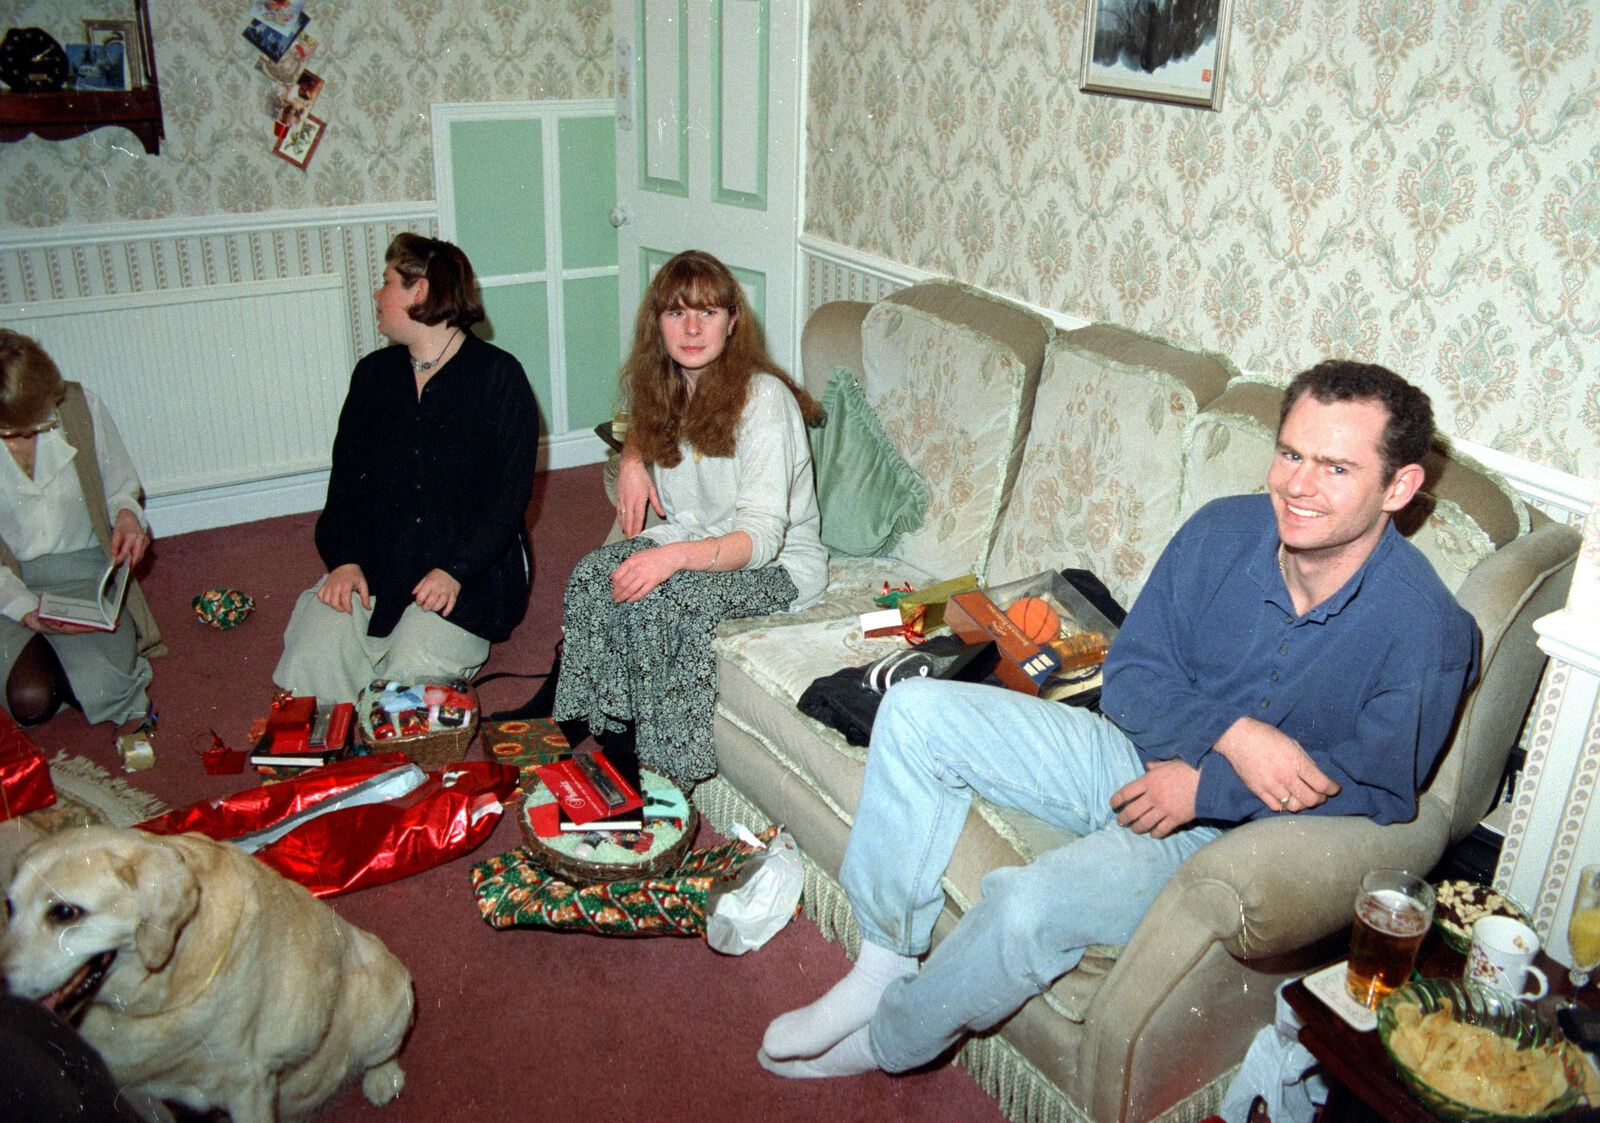 Sis, Mel and cousin Steve from Christmas Up North, Macclesfield, Cheshire - 25th December 1995